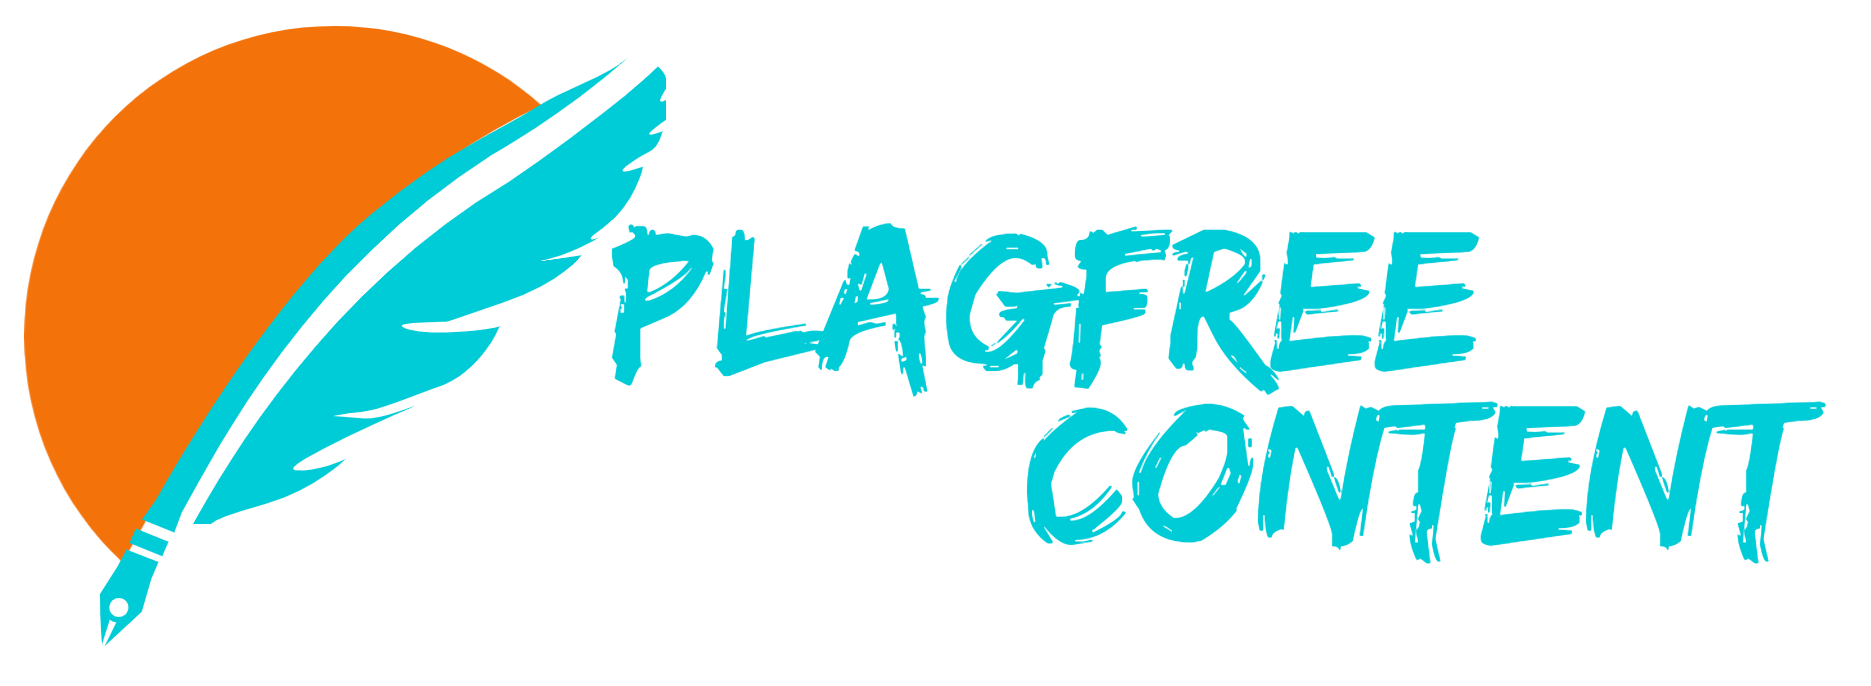 PlagFree Content